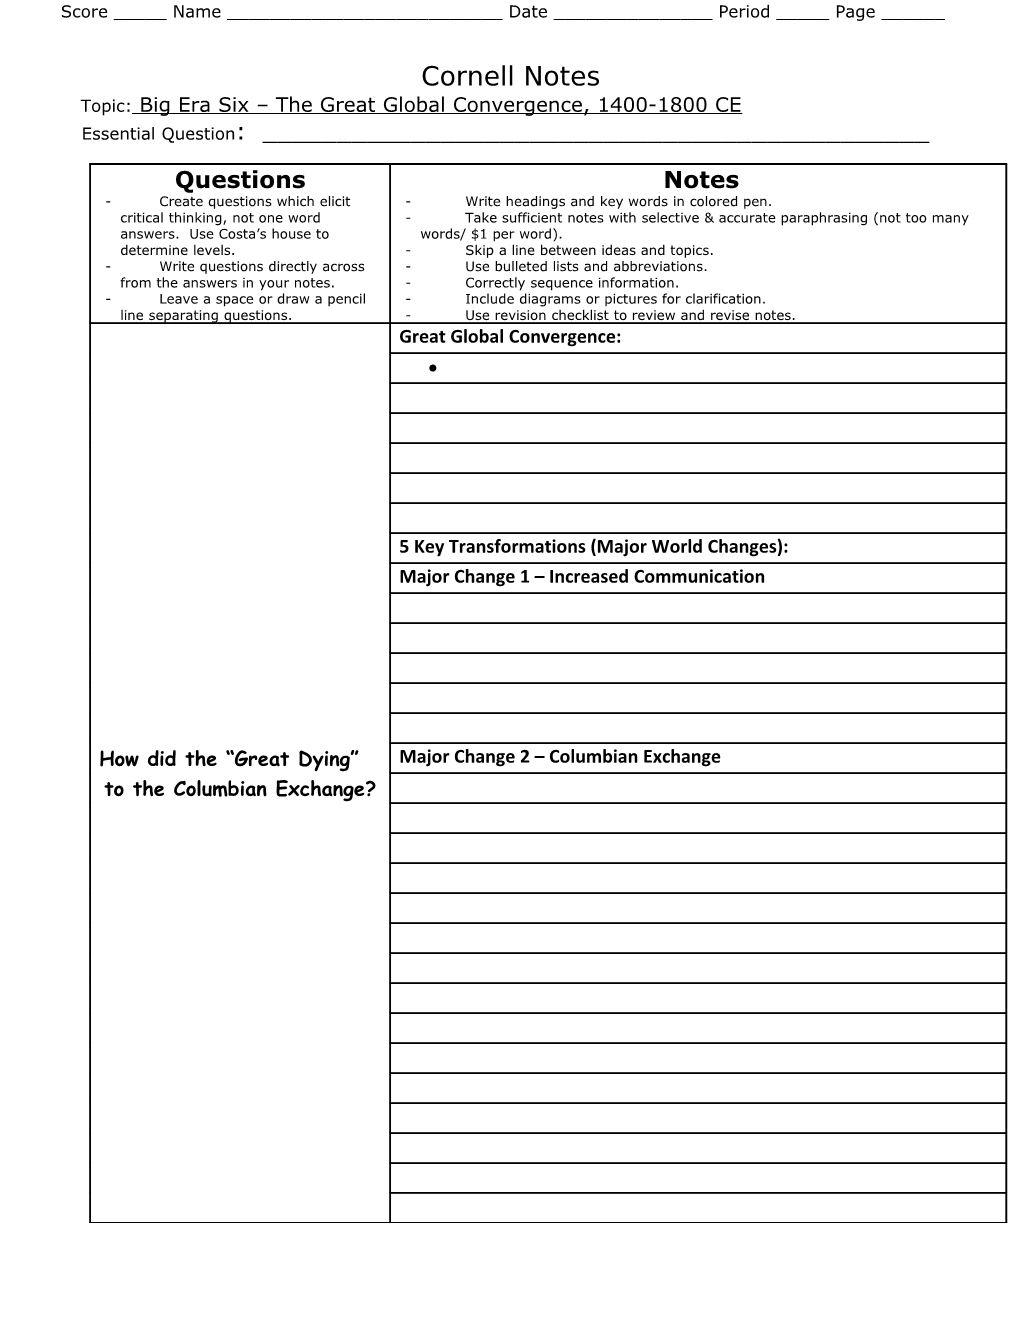 Cornell Notes Template s2